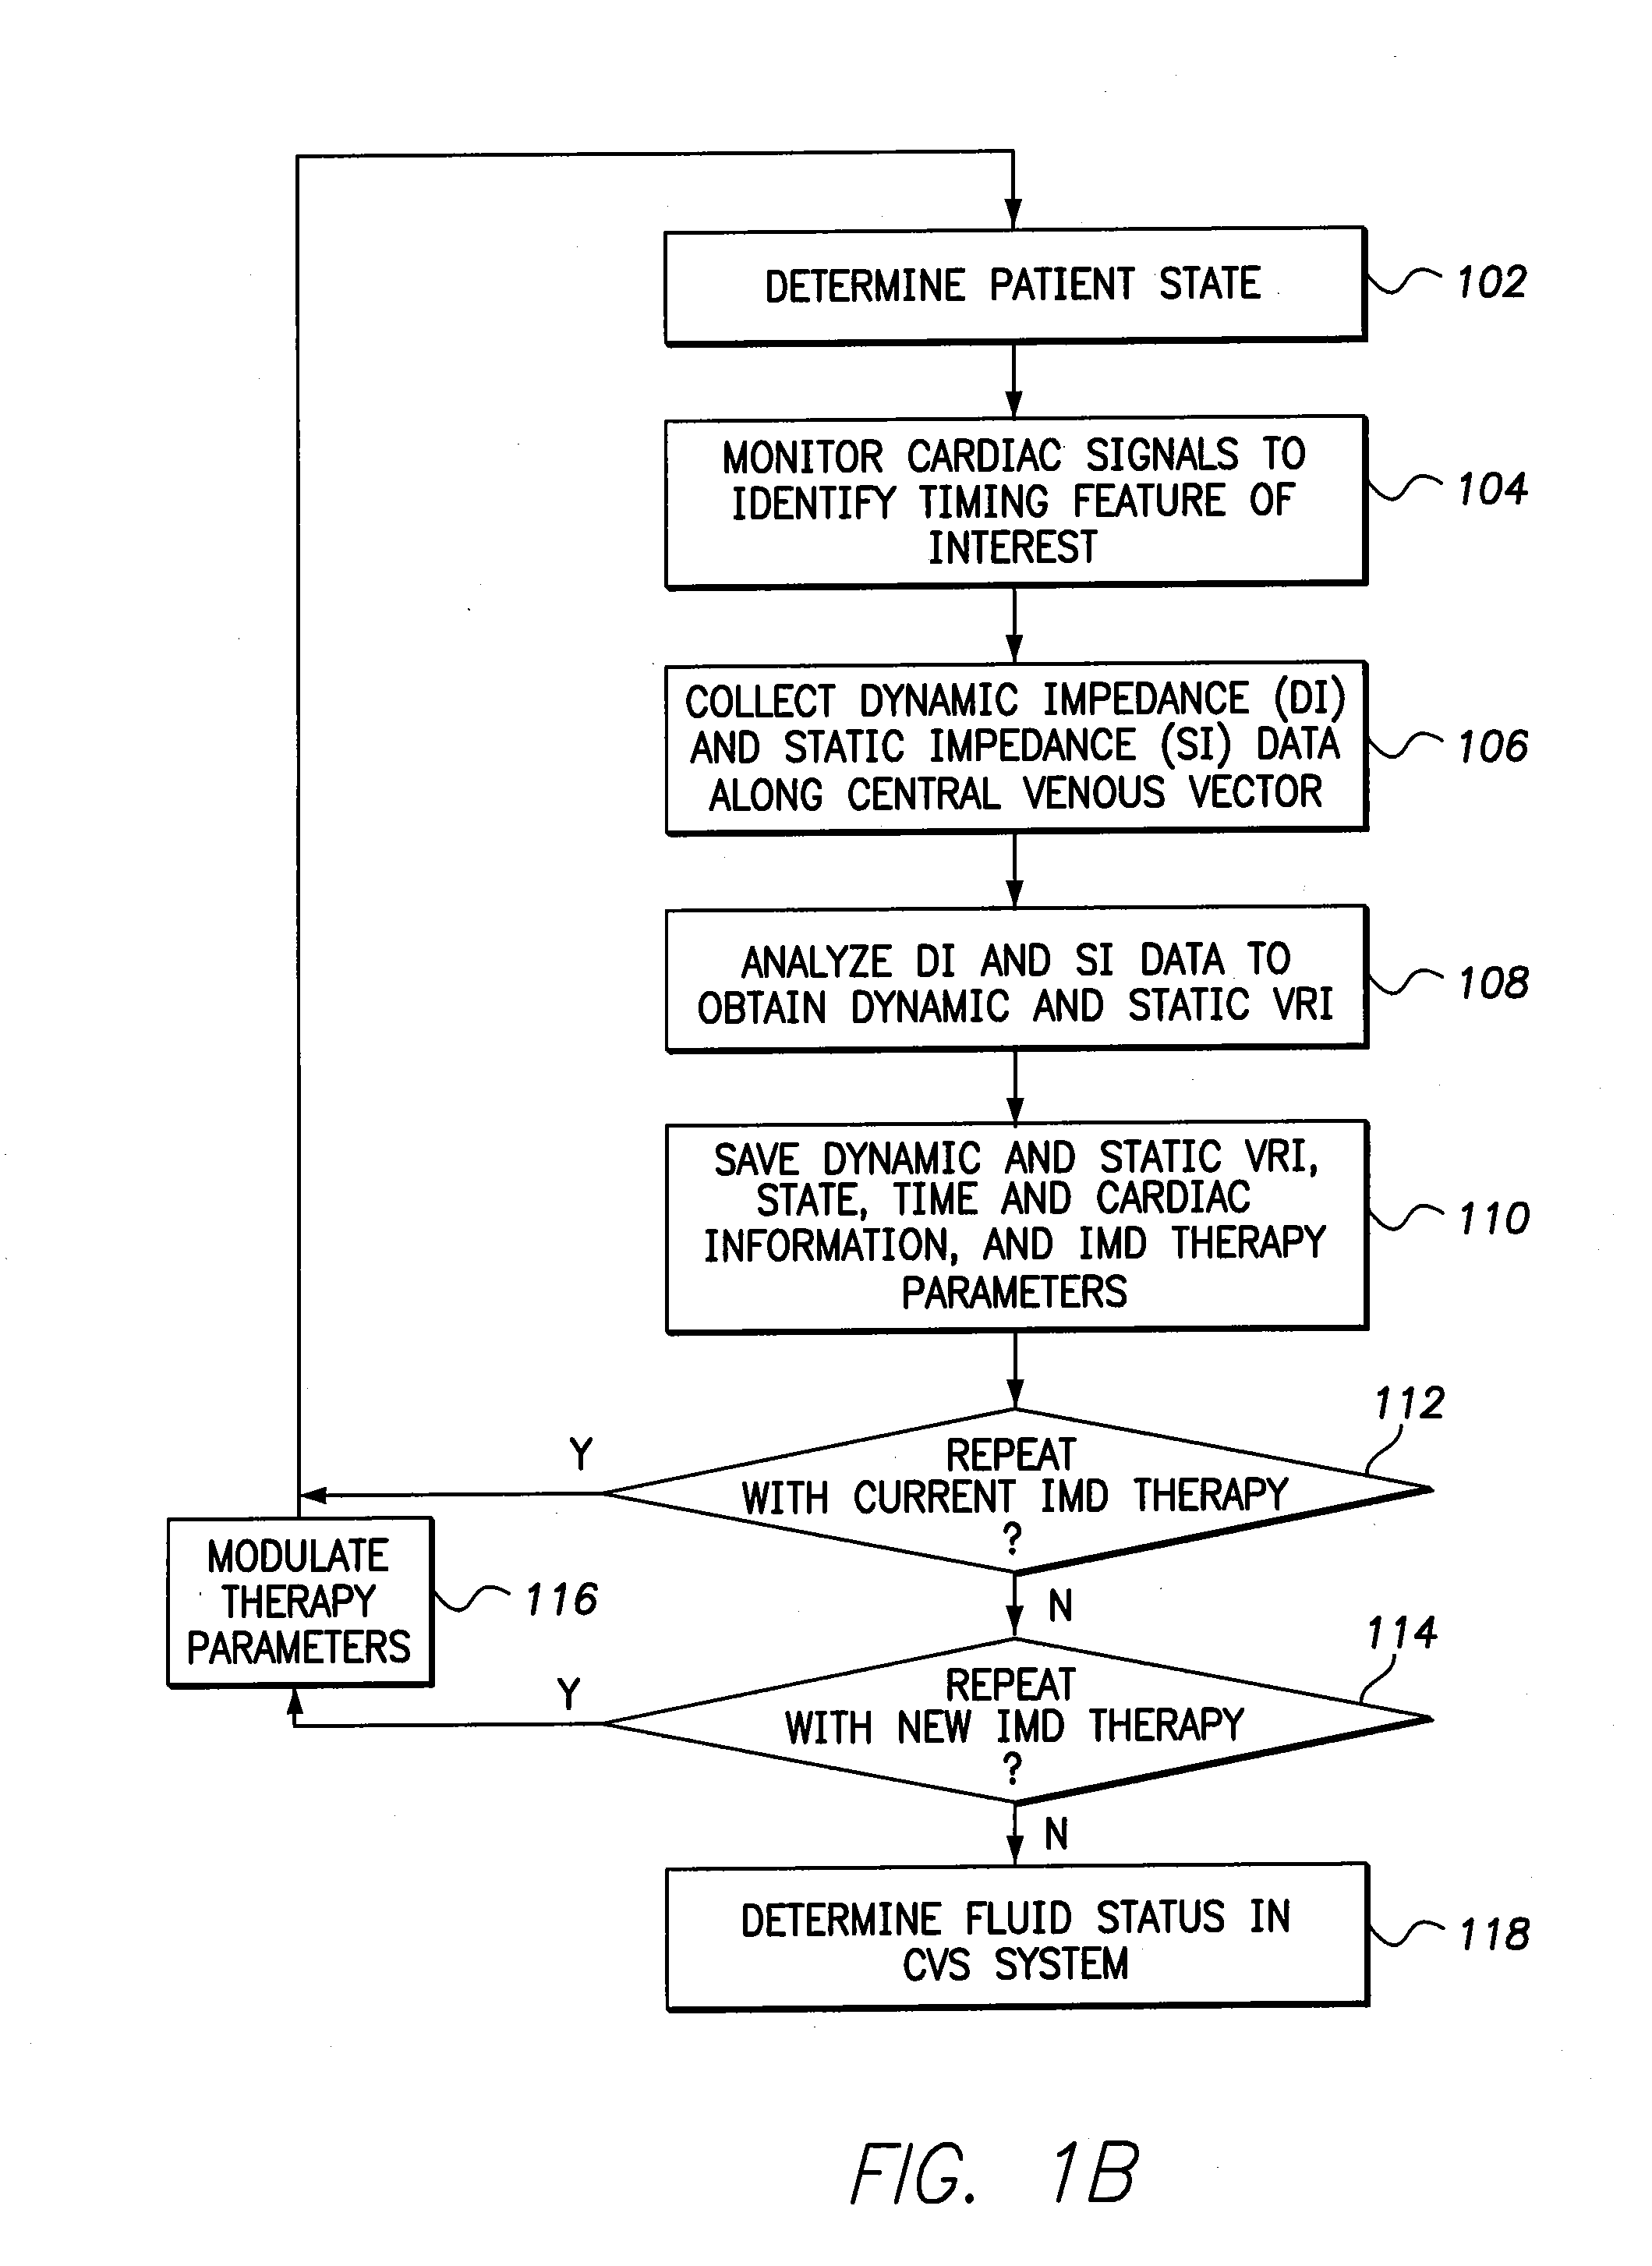 Method and system for determining fluid status based on a dynamic impedance surrogate for central venous pressure